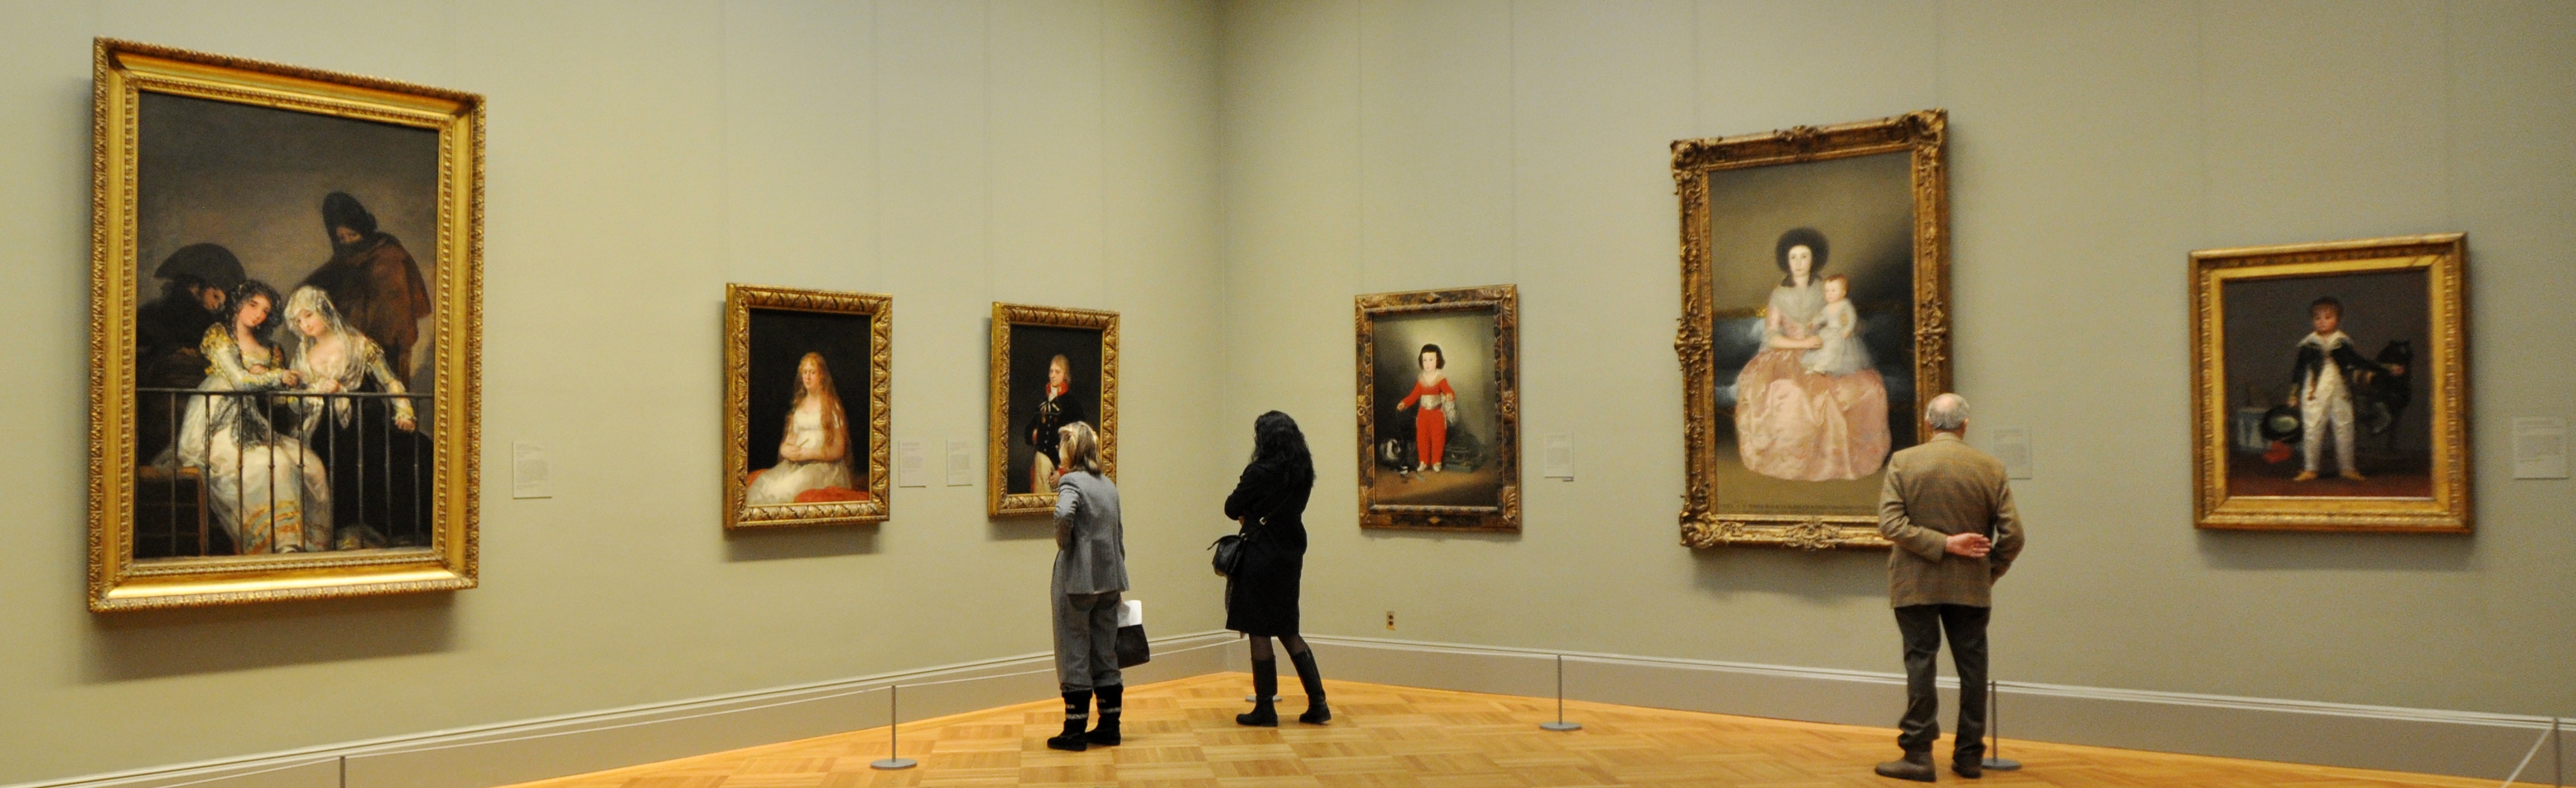 14 Amazing Facts About the Metropolitan Museum of Art that Only ...